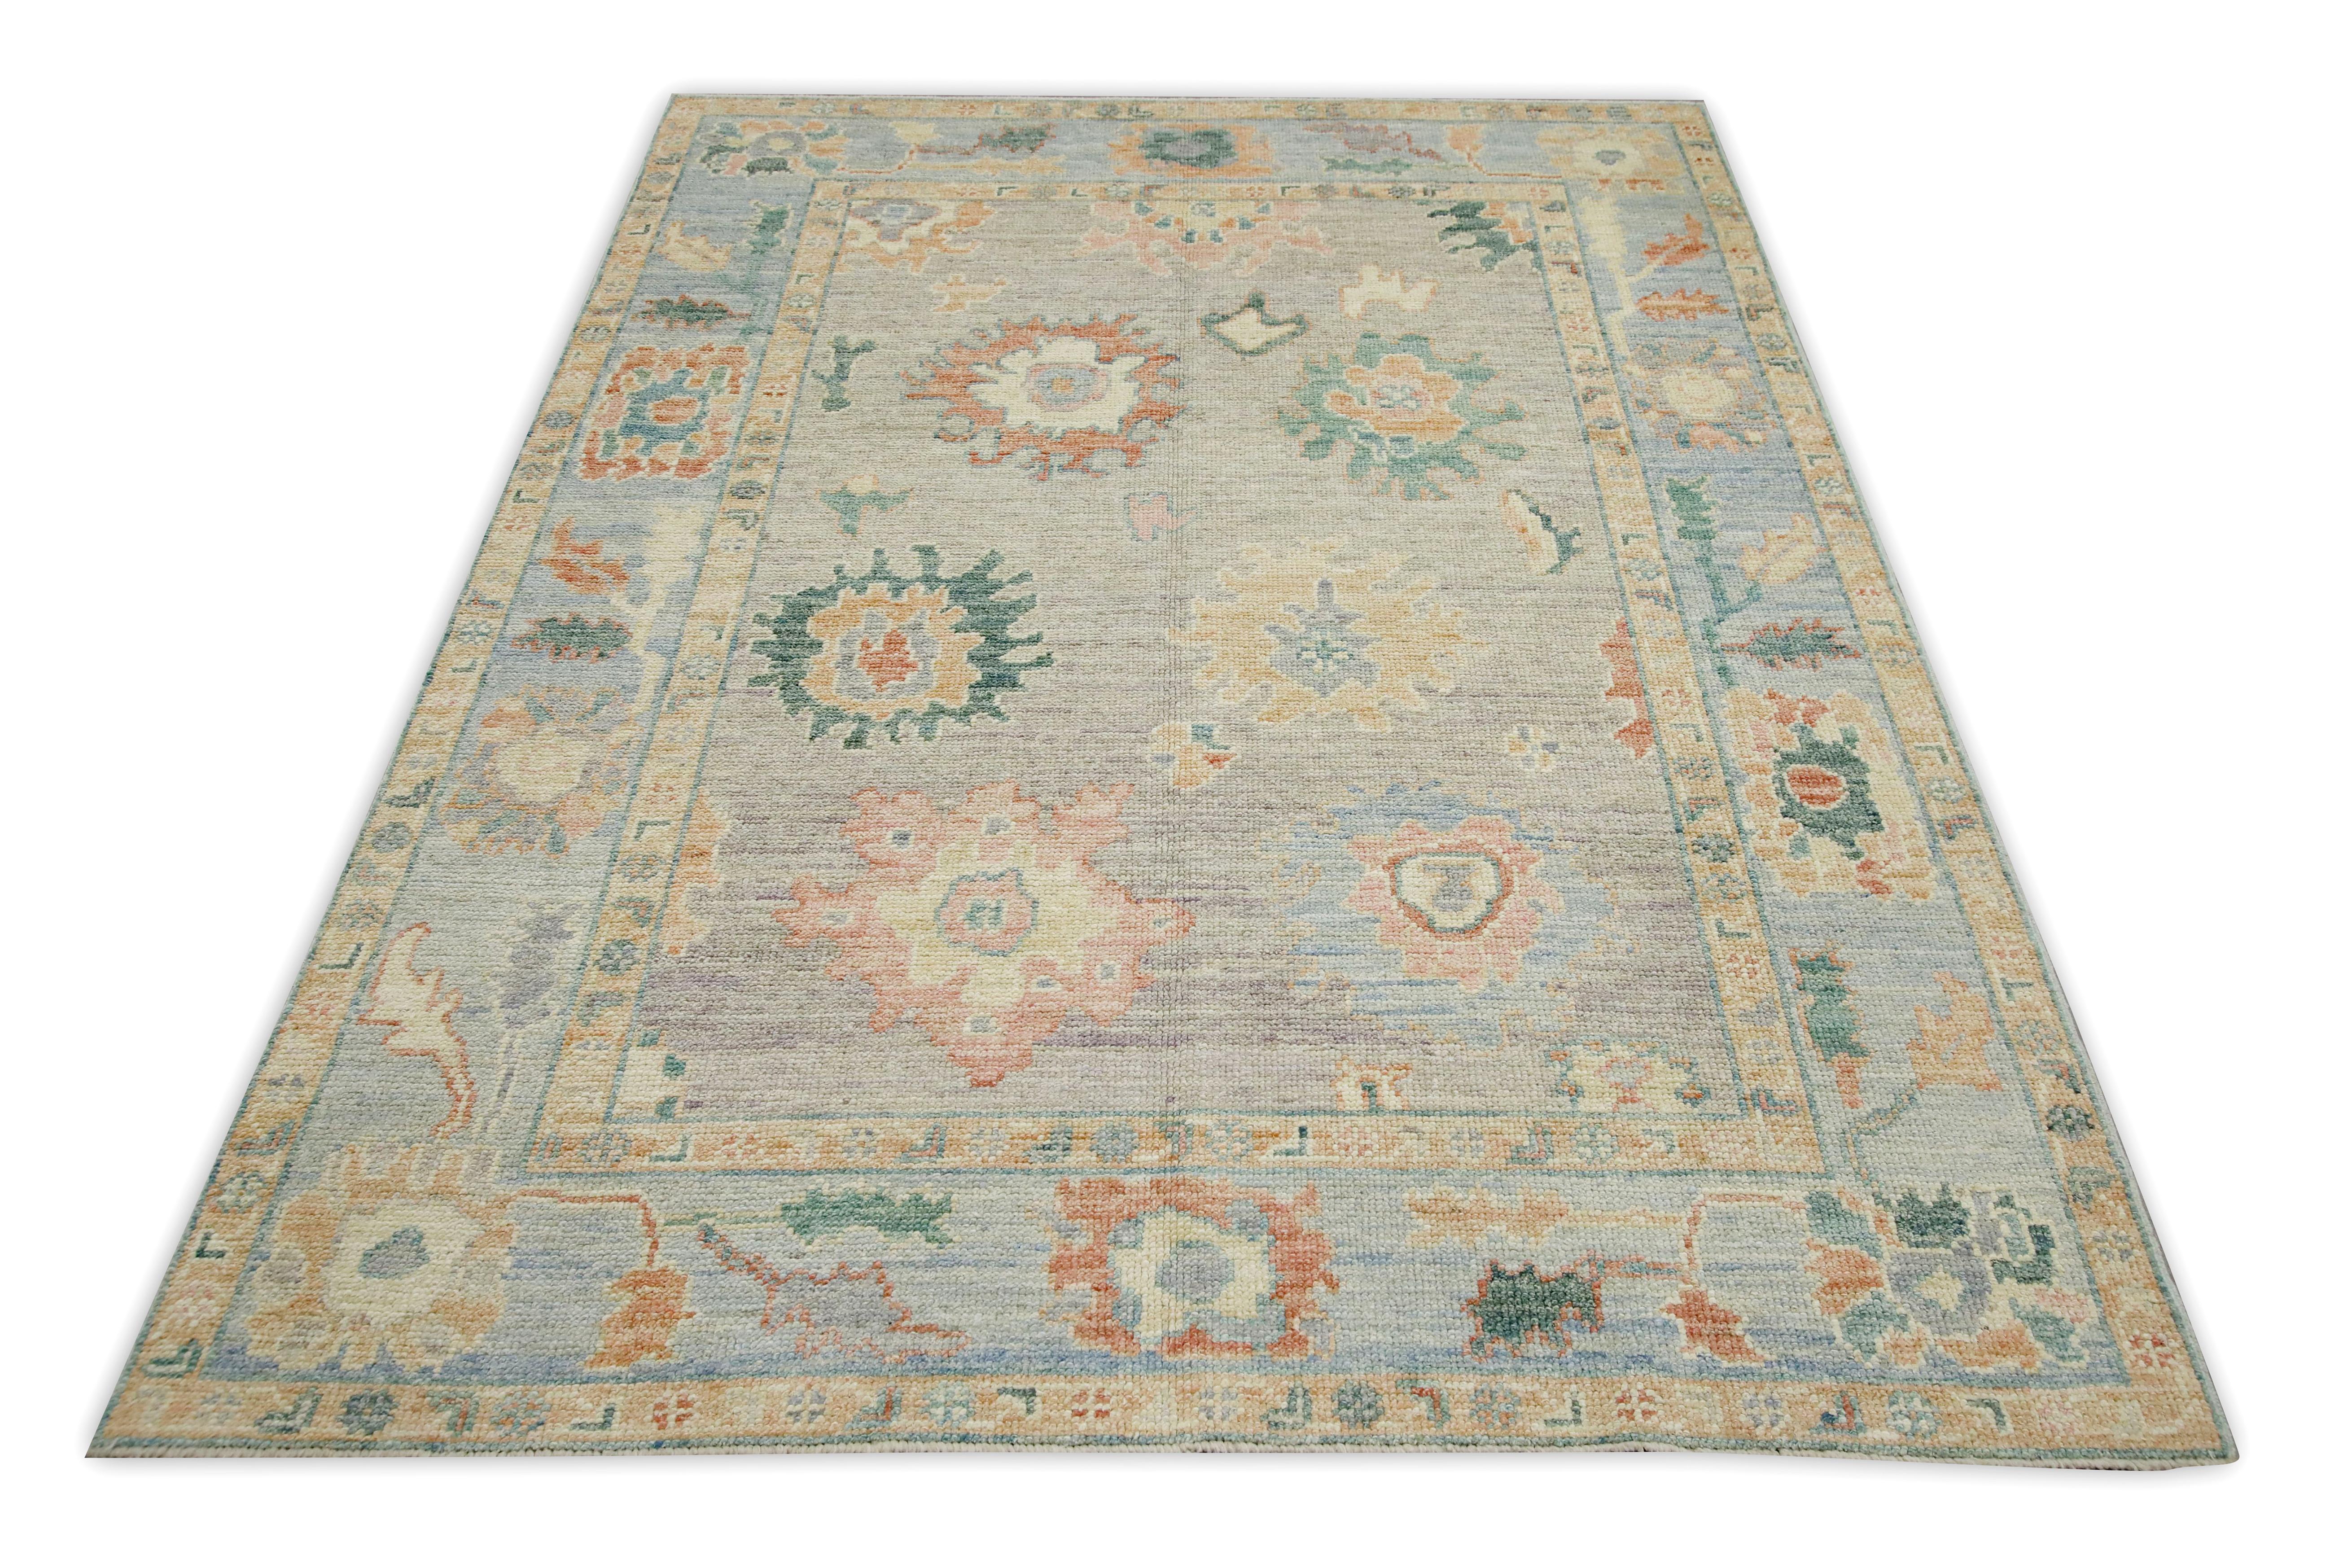 Contemporary Multicolor Floral Design Handwoven Wool Turkish Oushak Rug 4'11